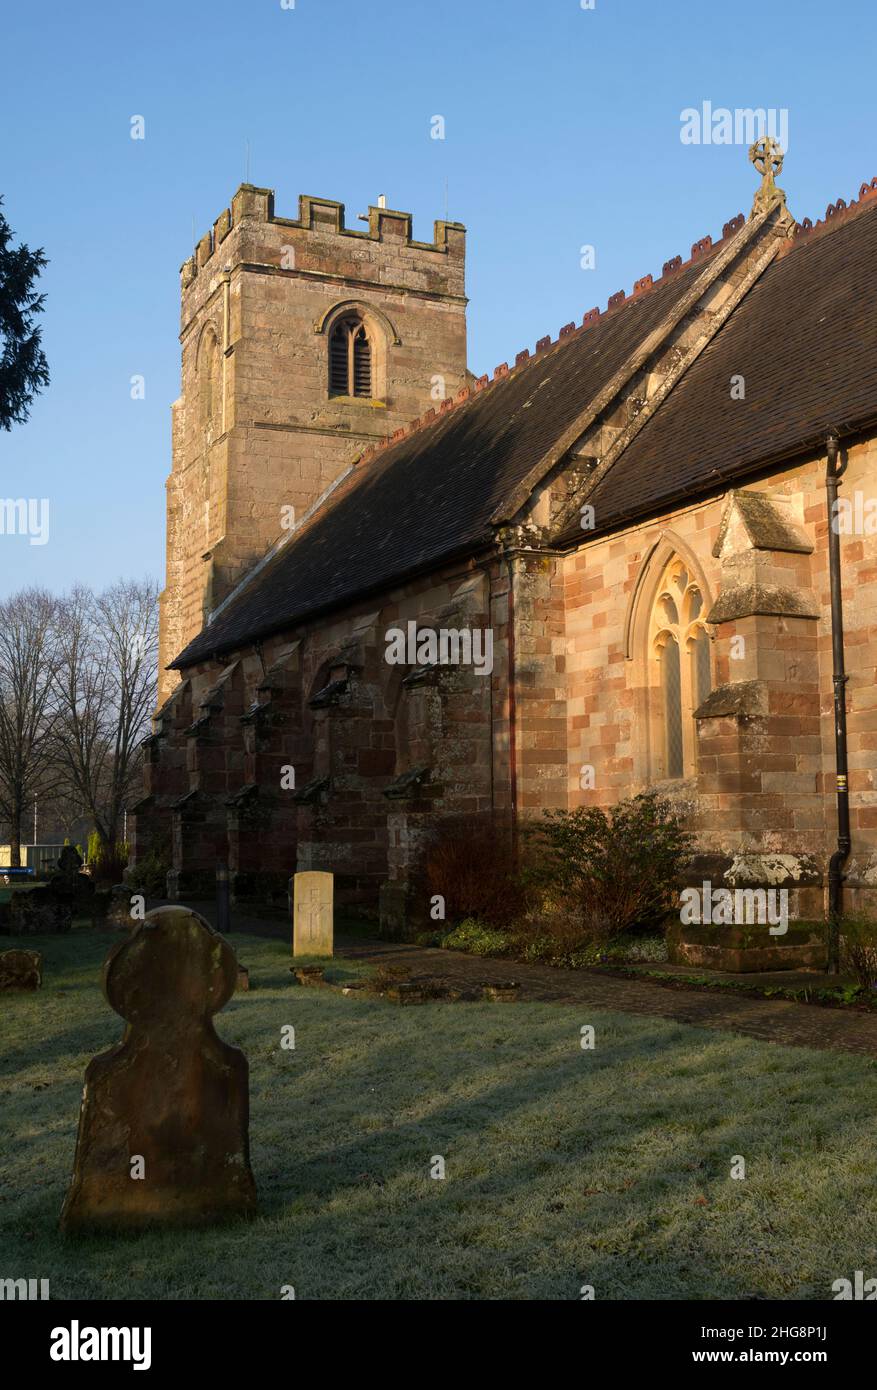 St. Peter`s Church in winter, Ipsley, Redditch, Worcestershire, England, UK Stock Photo